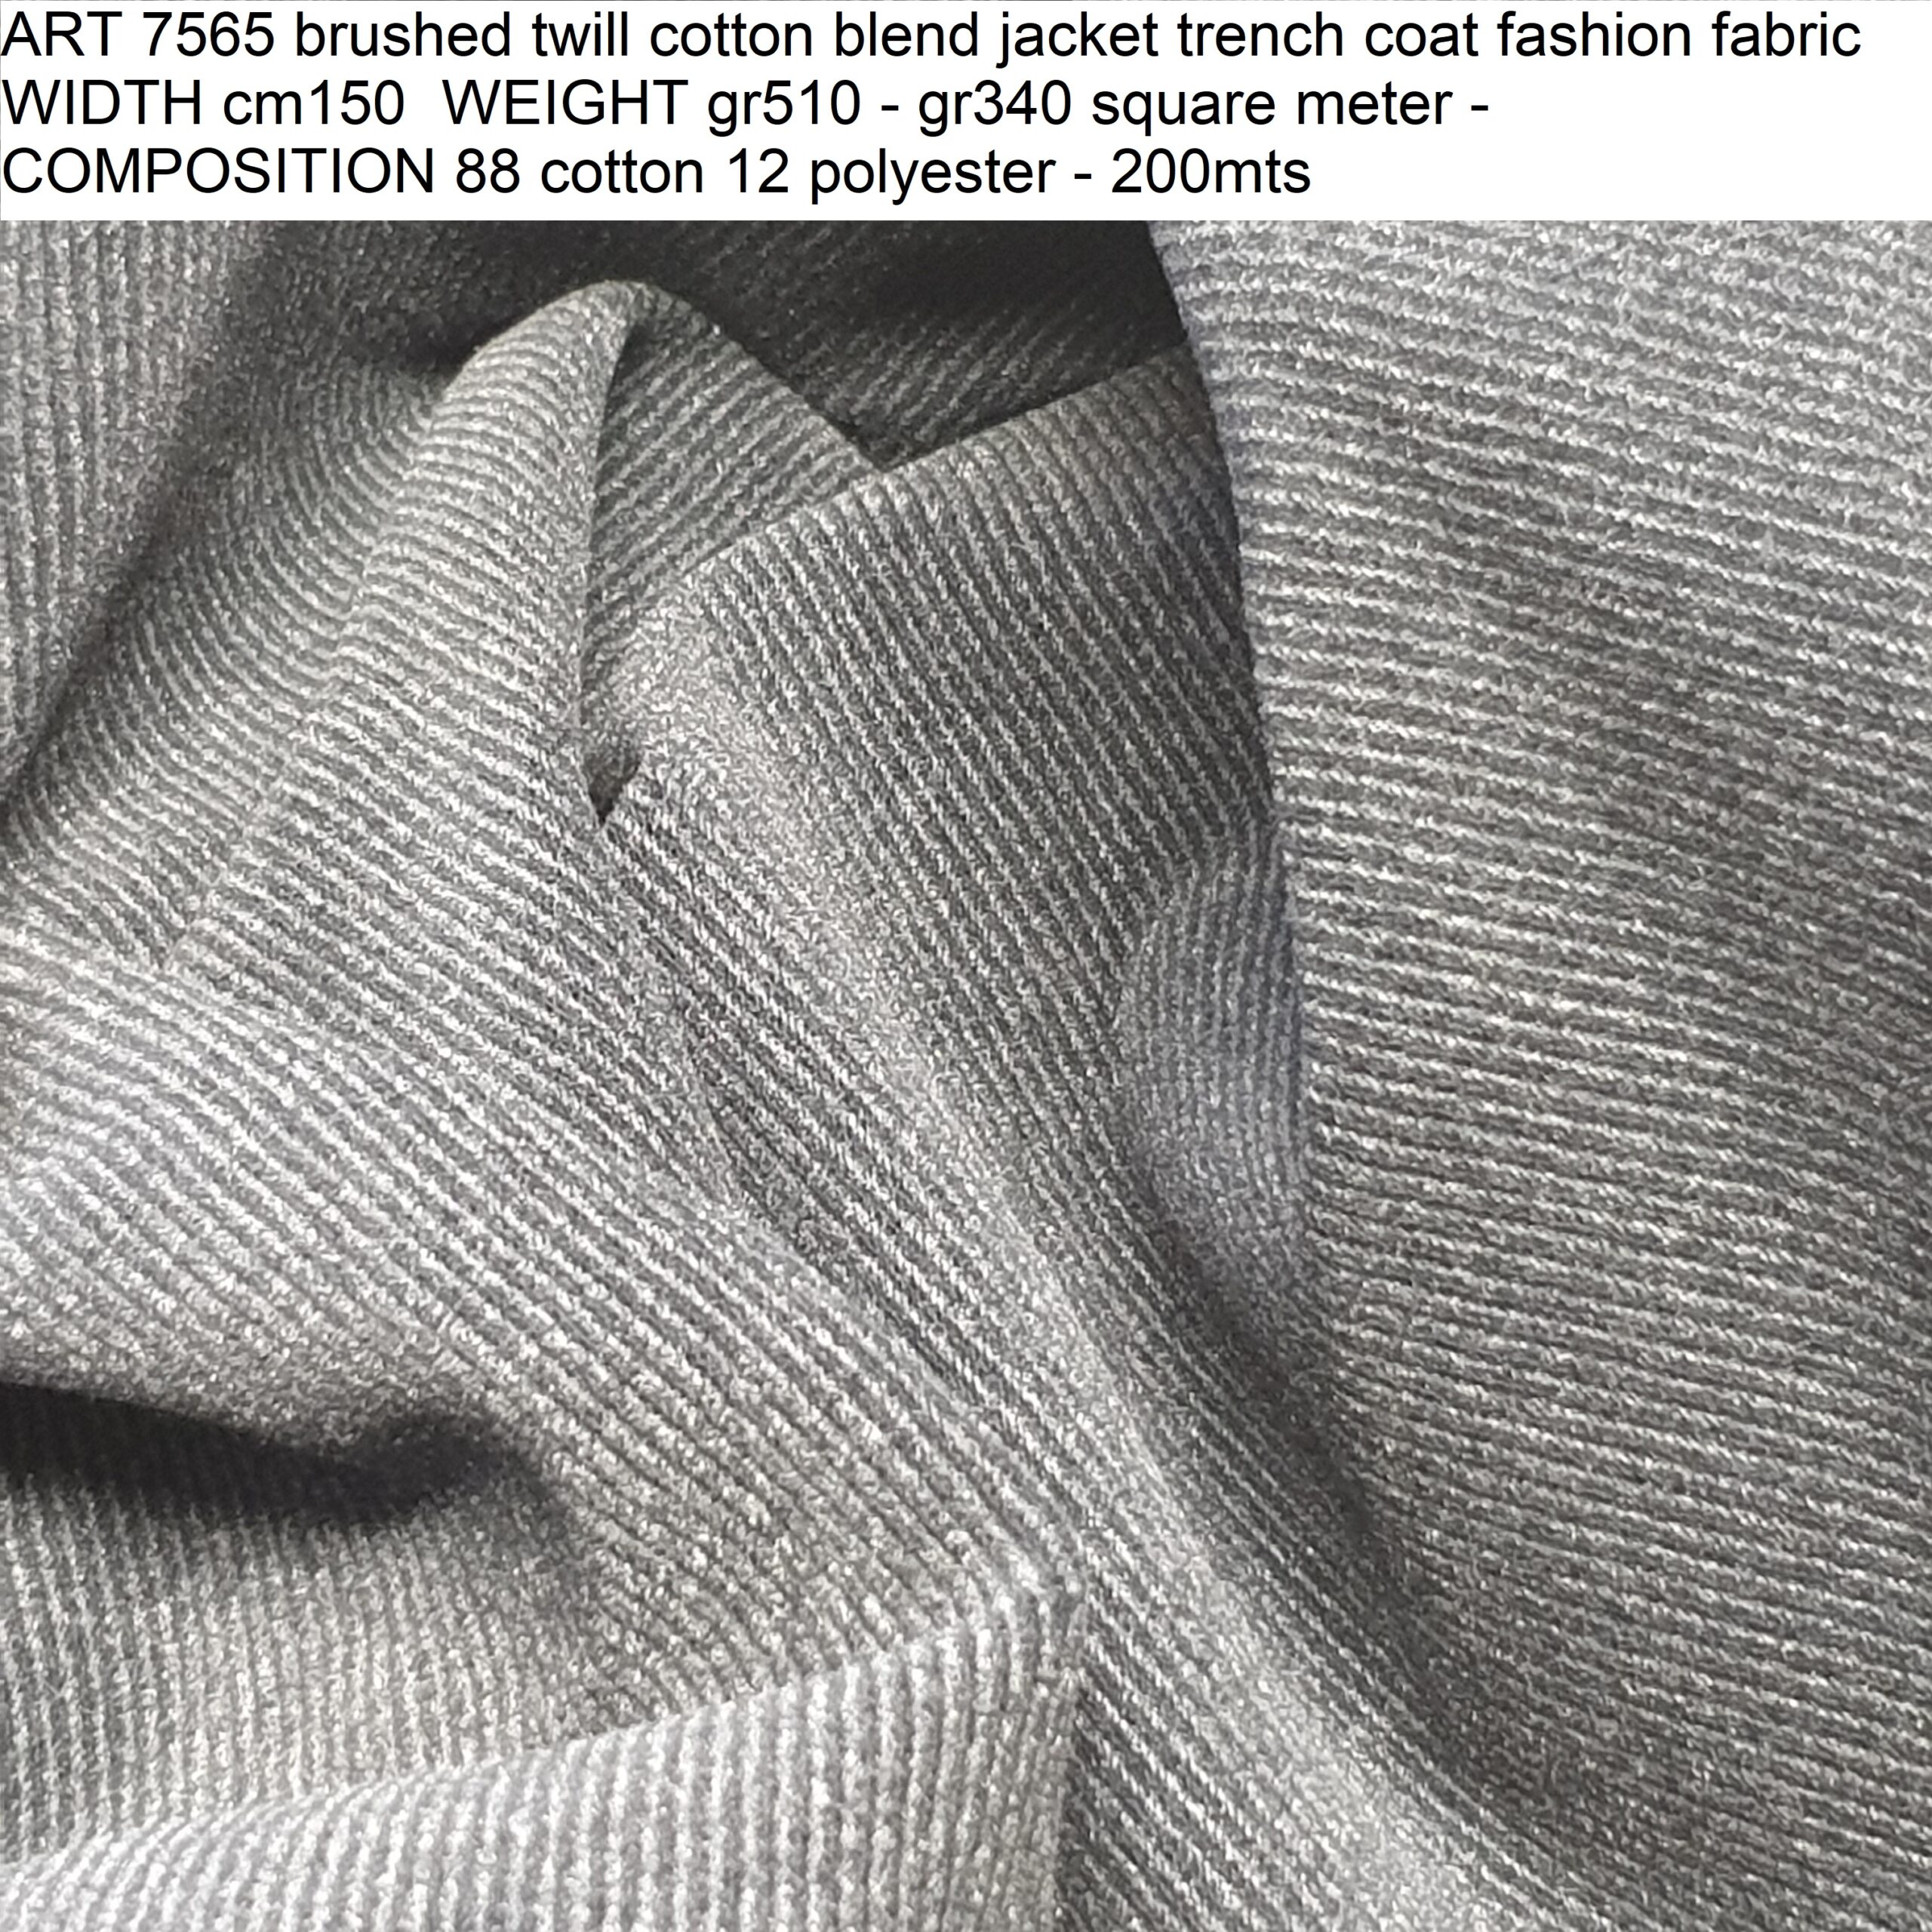 7565 brushed twill cotton blend jacket trench coat fashion fabric WIDTH  cm150 WEIGHT gr510 - gr340 square meter - COMP 88 cotton 12 polyester -  200mts